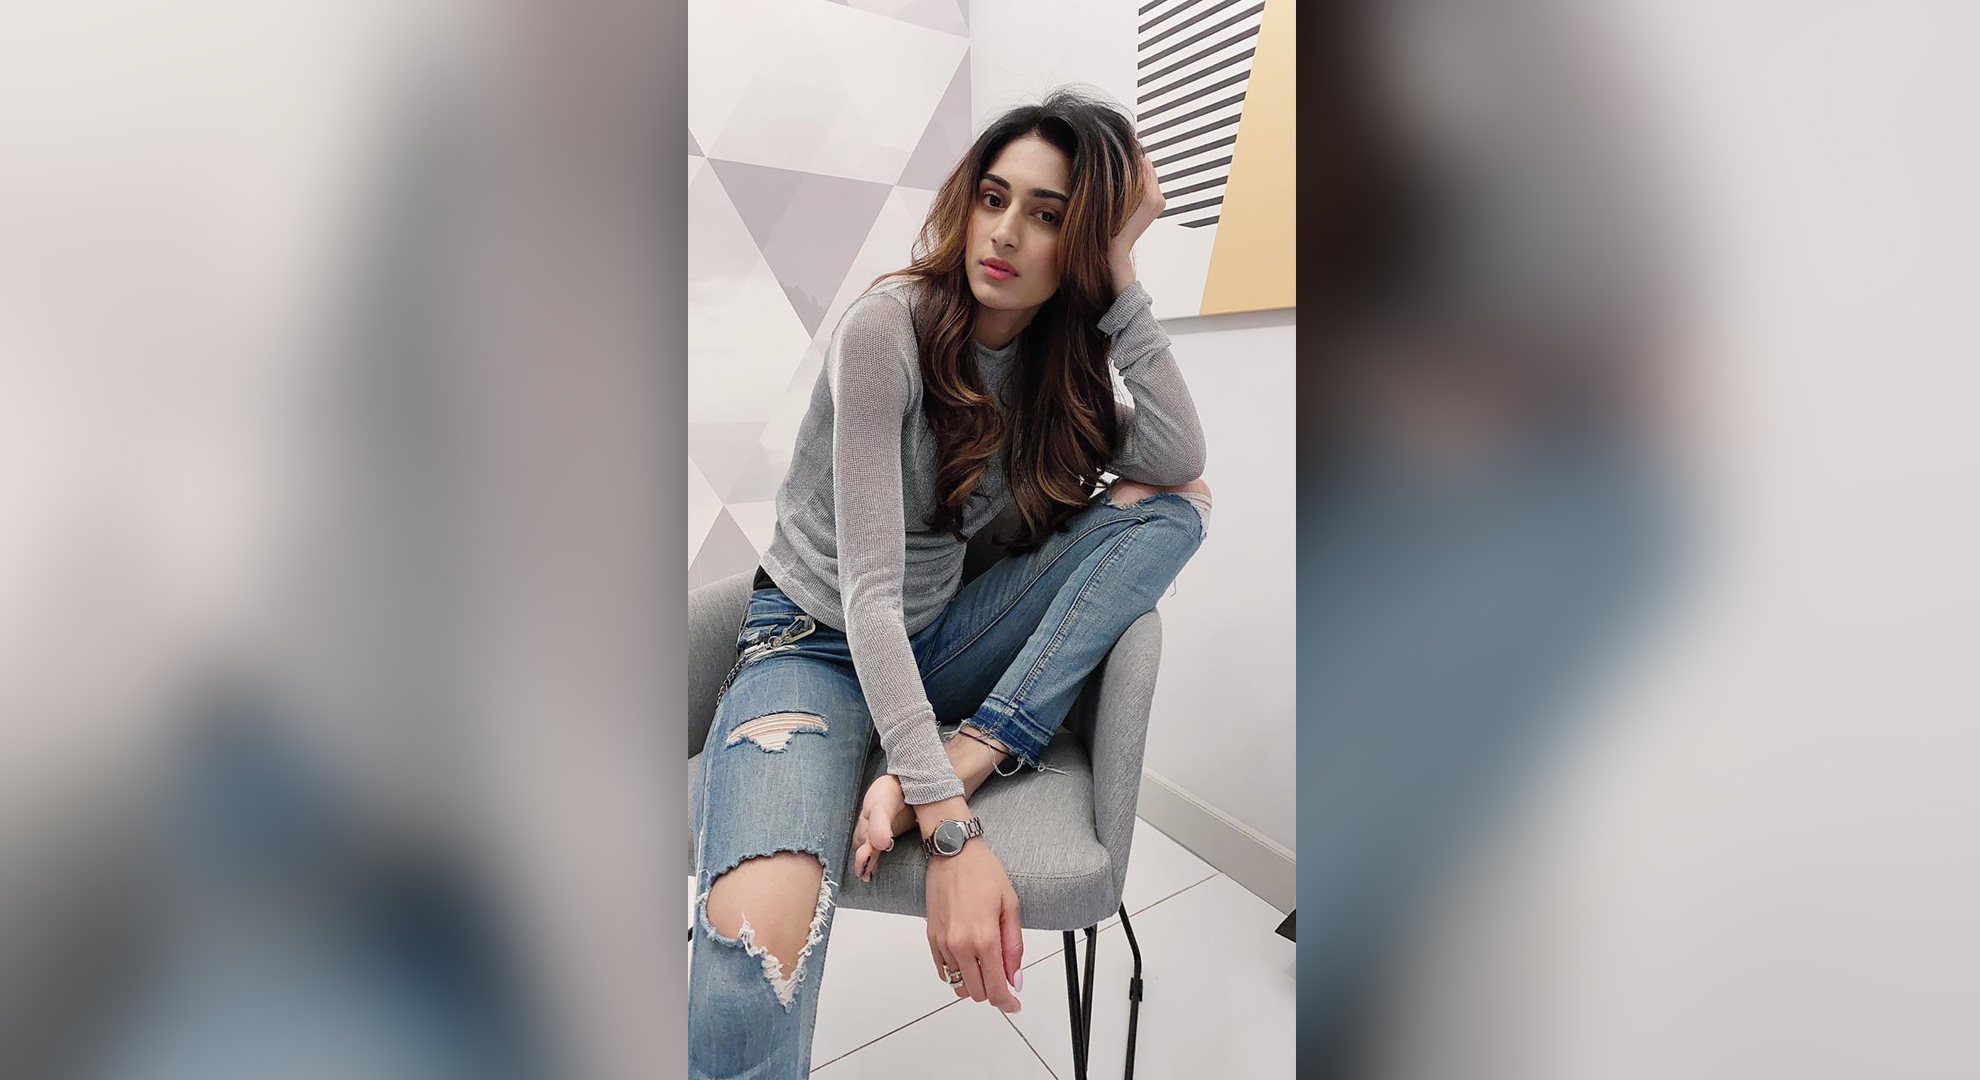 “I decided to highlight issues through social media videos which are in the need of the hour” -Erica Fernandes